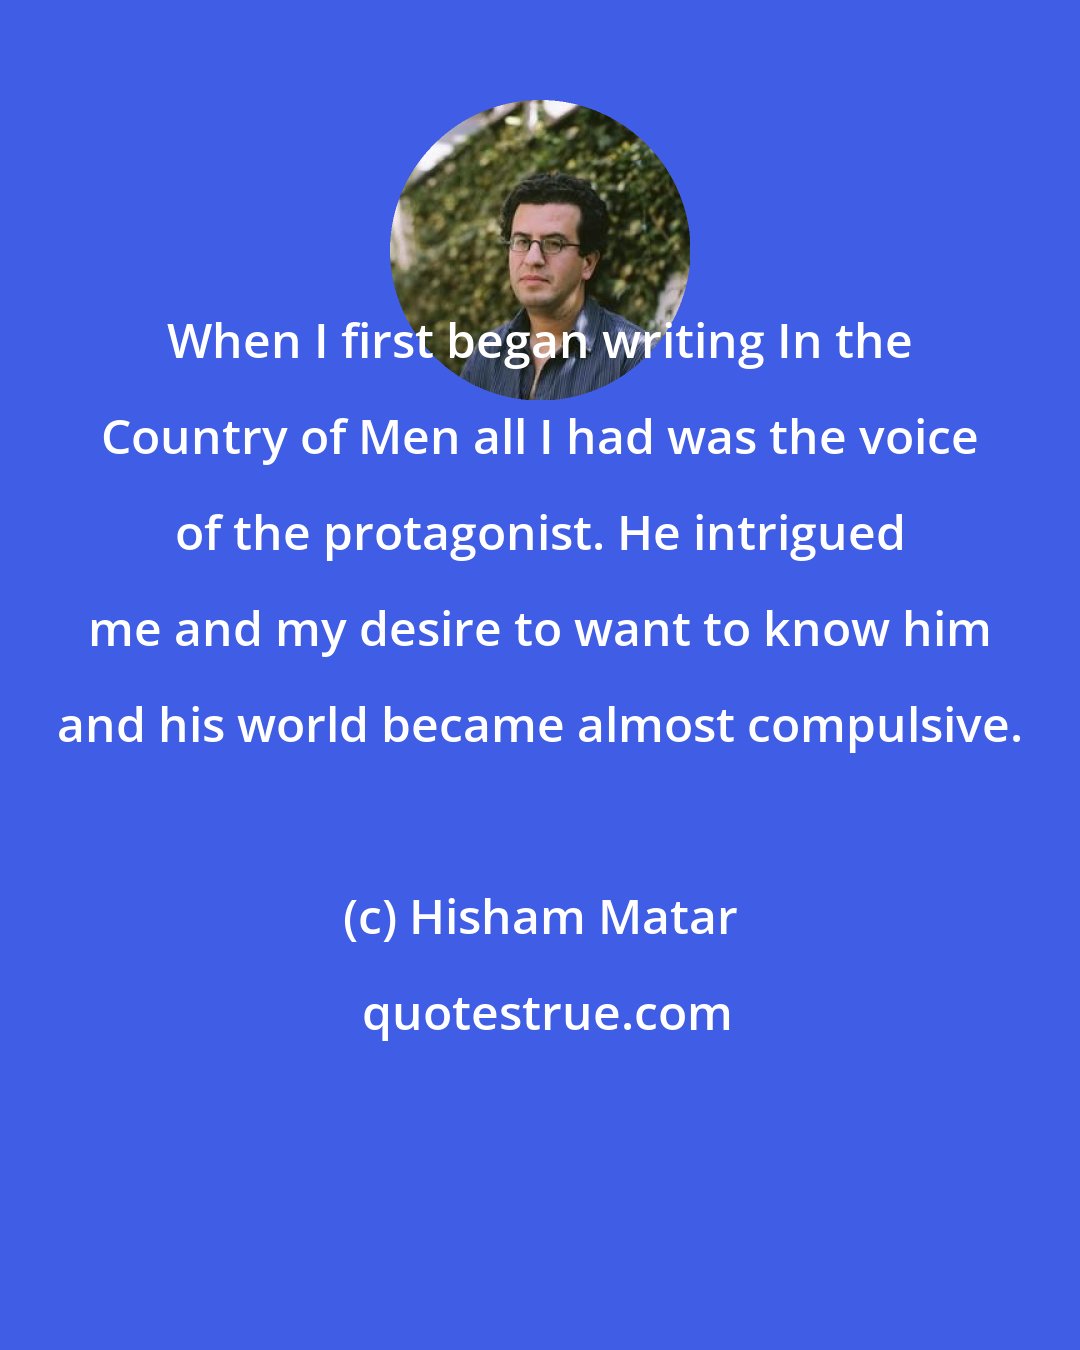 Hisham Matar: When I first began writing In the Country of Men all I had was the voice of the protagonist. He intrigued me and my desire to want to know him and his world became almost compulsive.